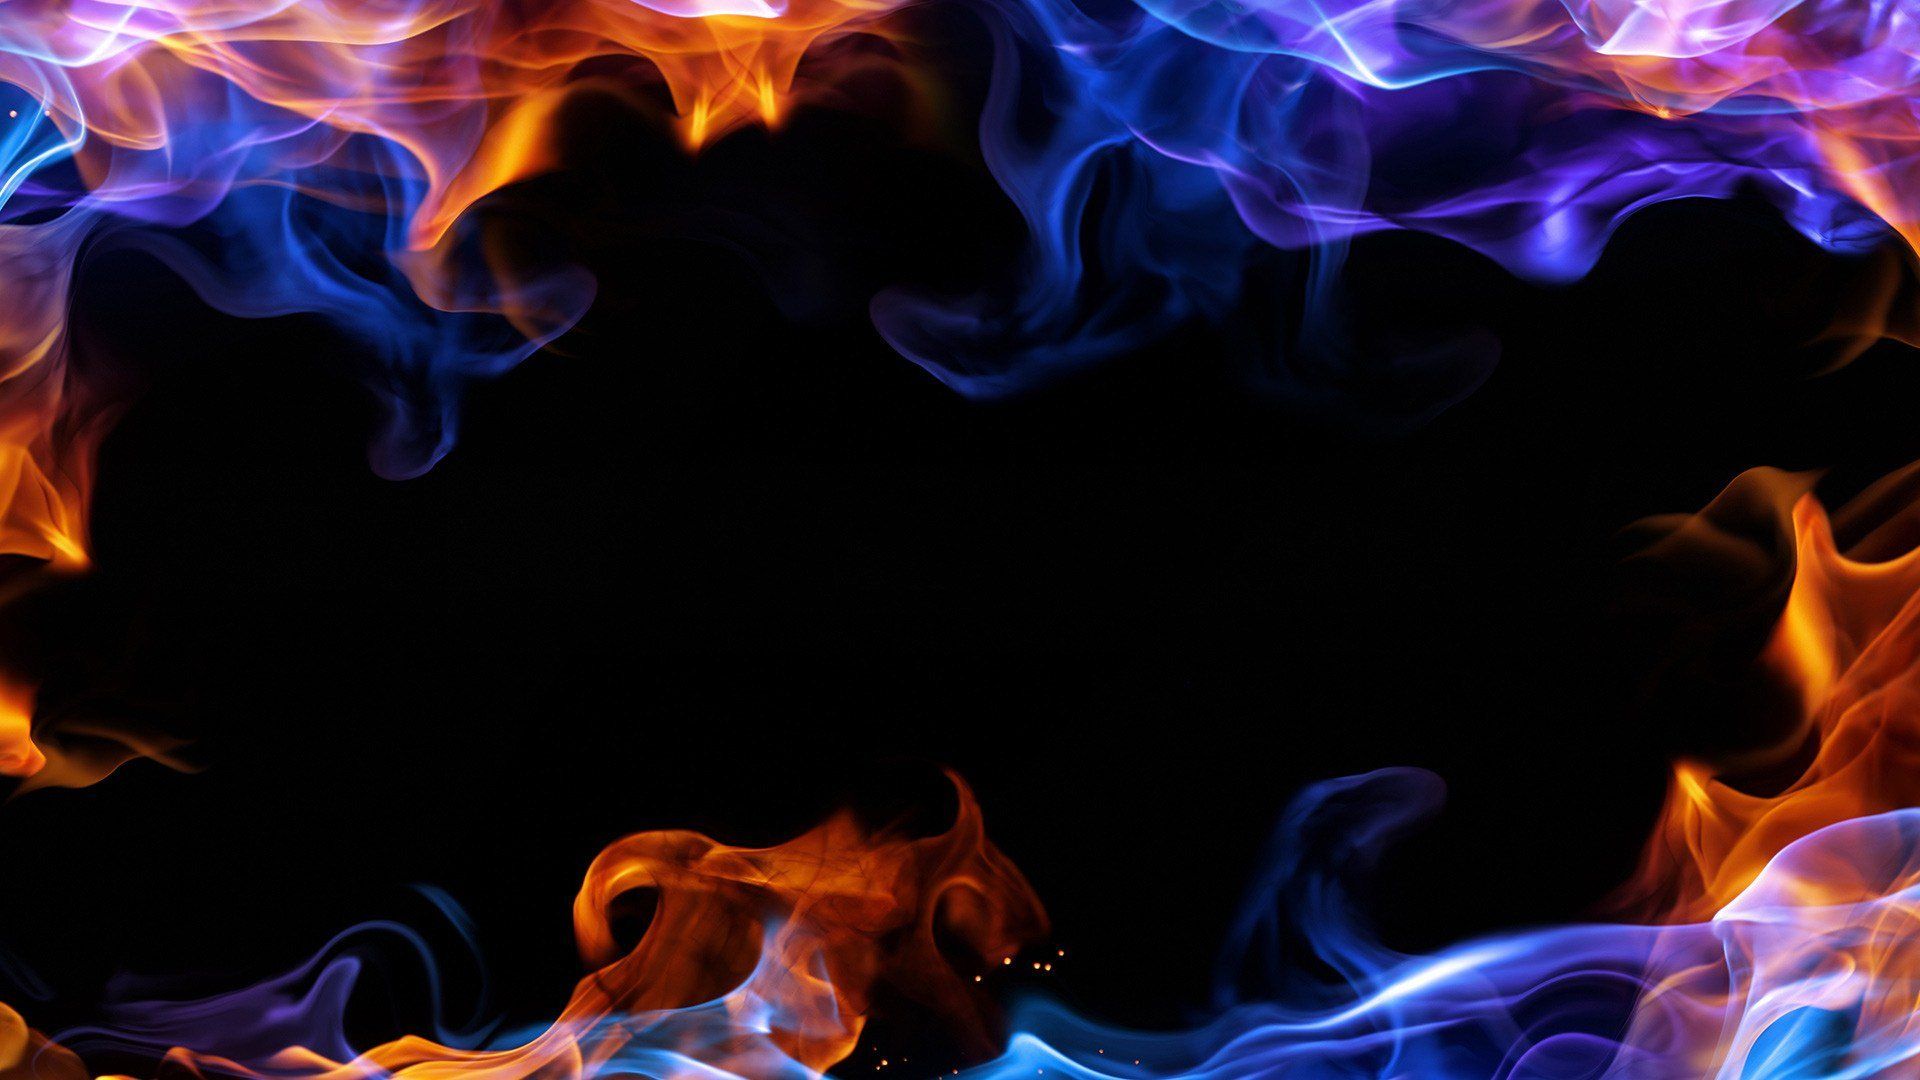 Flame HD Wallpaper Flame Images Free Cool Backgrounds